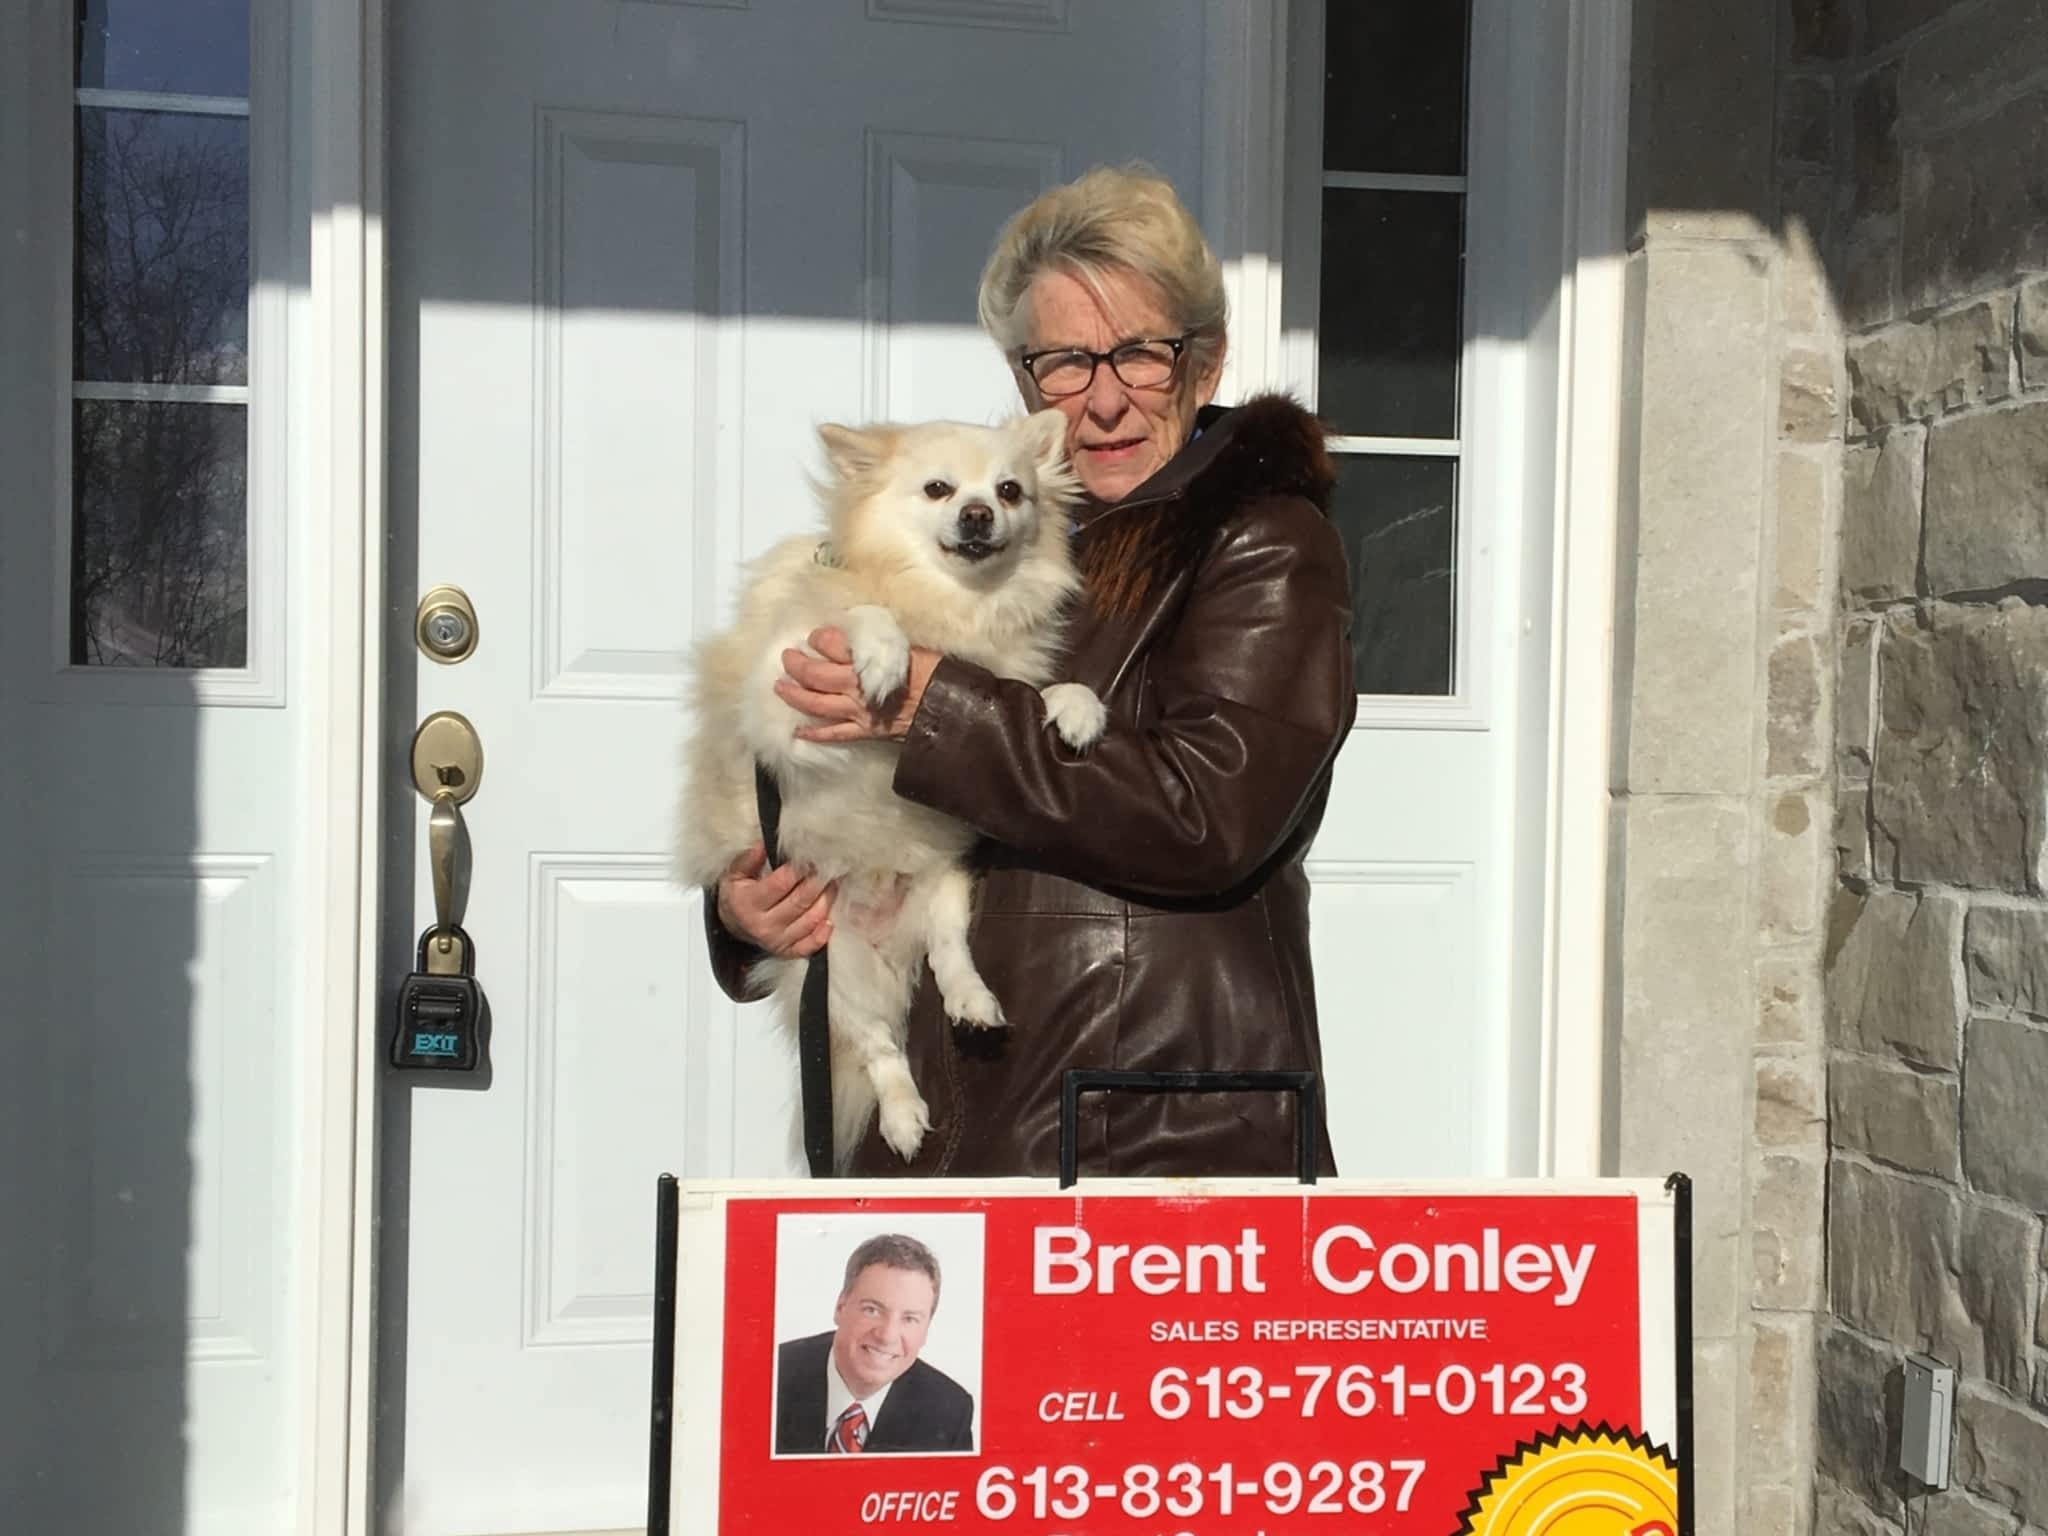 photo Brent Conley - Royal Lepage Team Realty